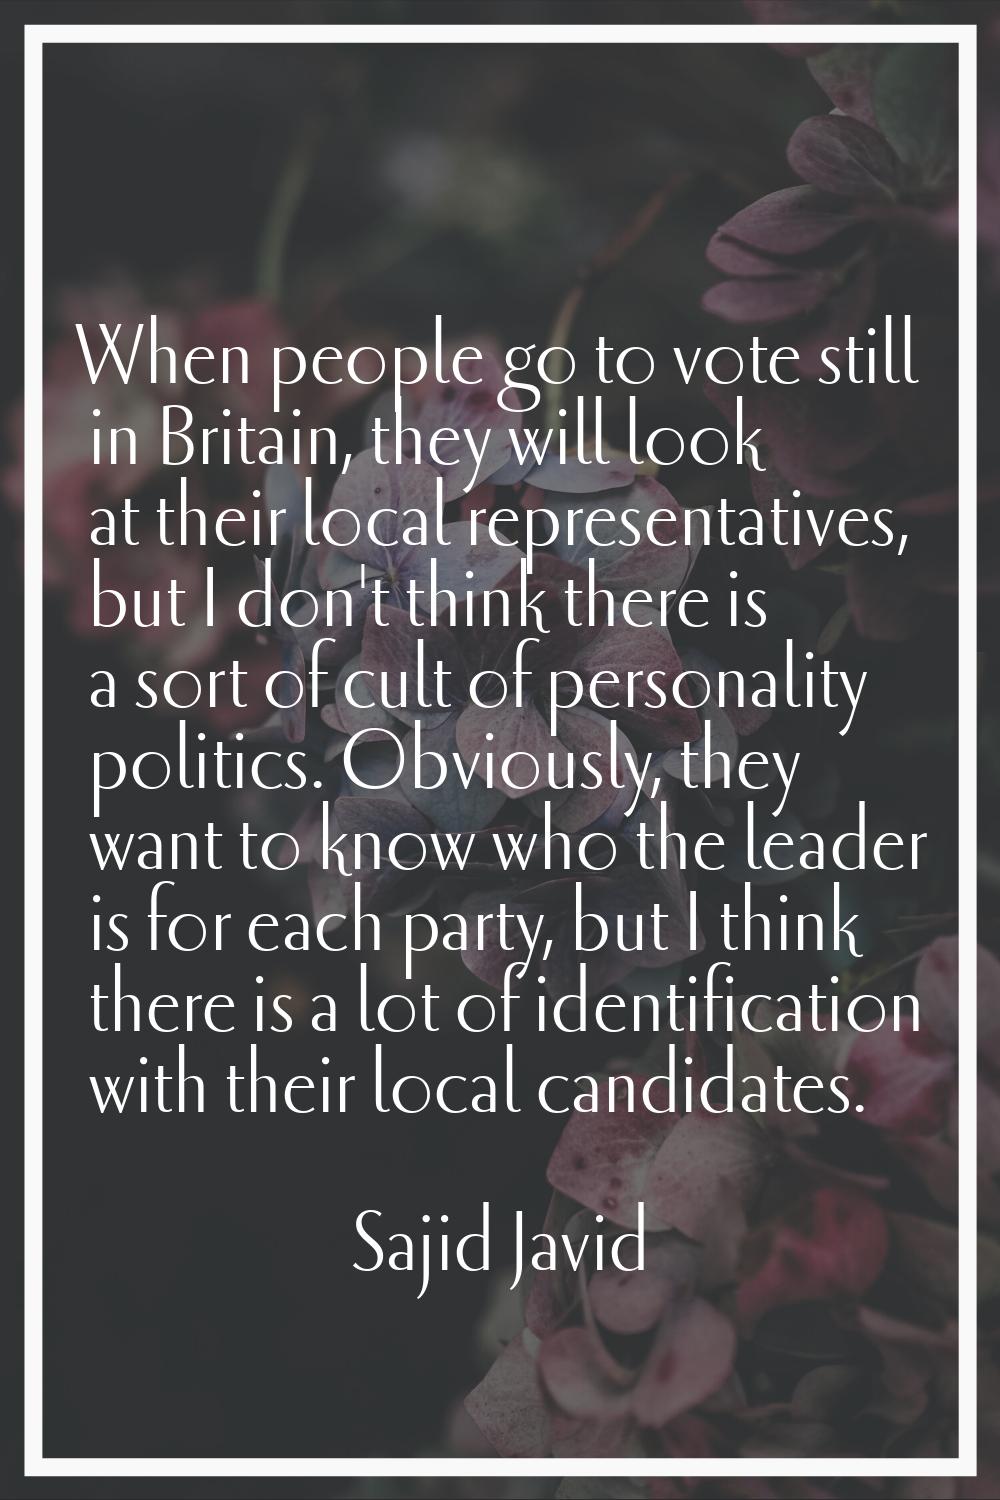 When people go to vote still in Britain, they will look at their local representatives, but I don't